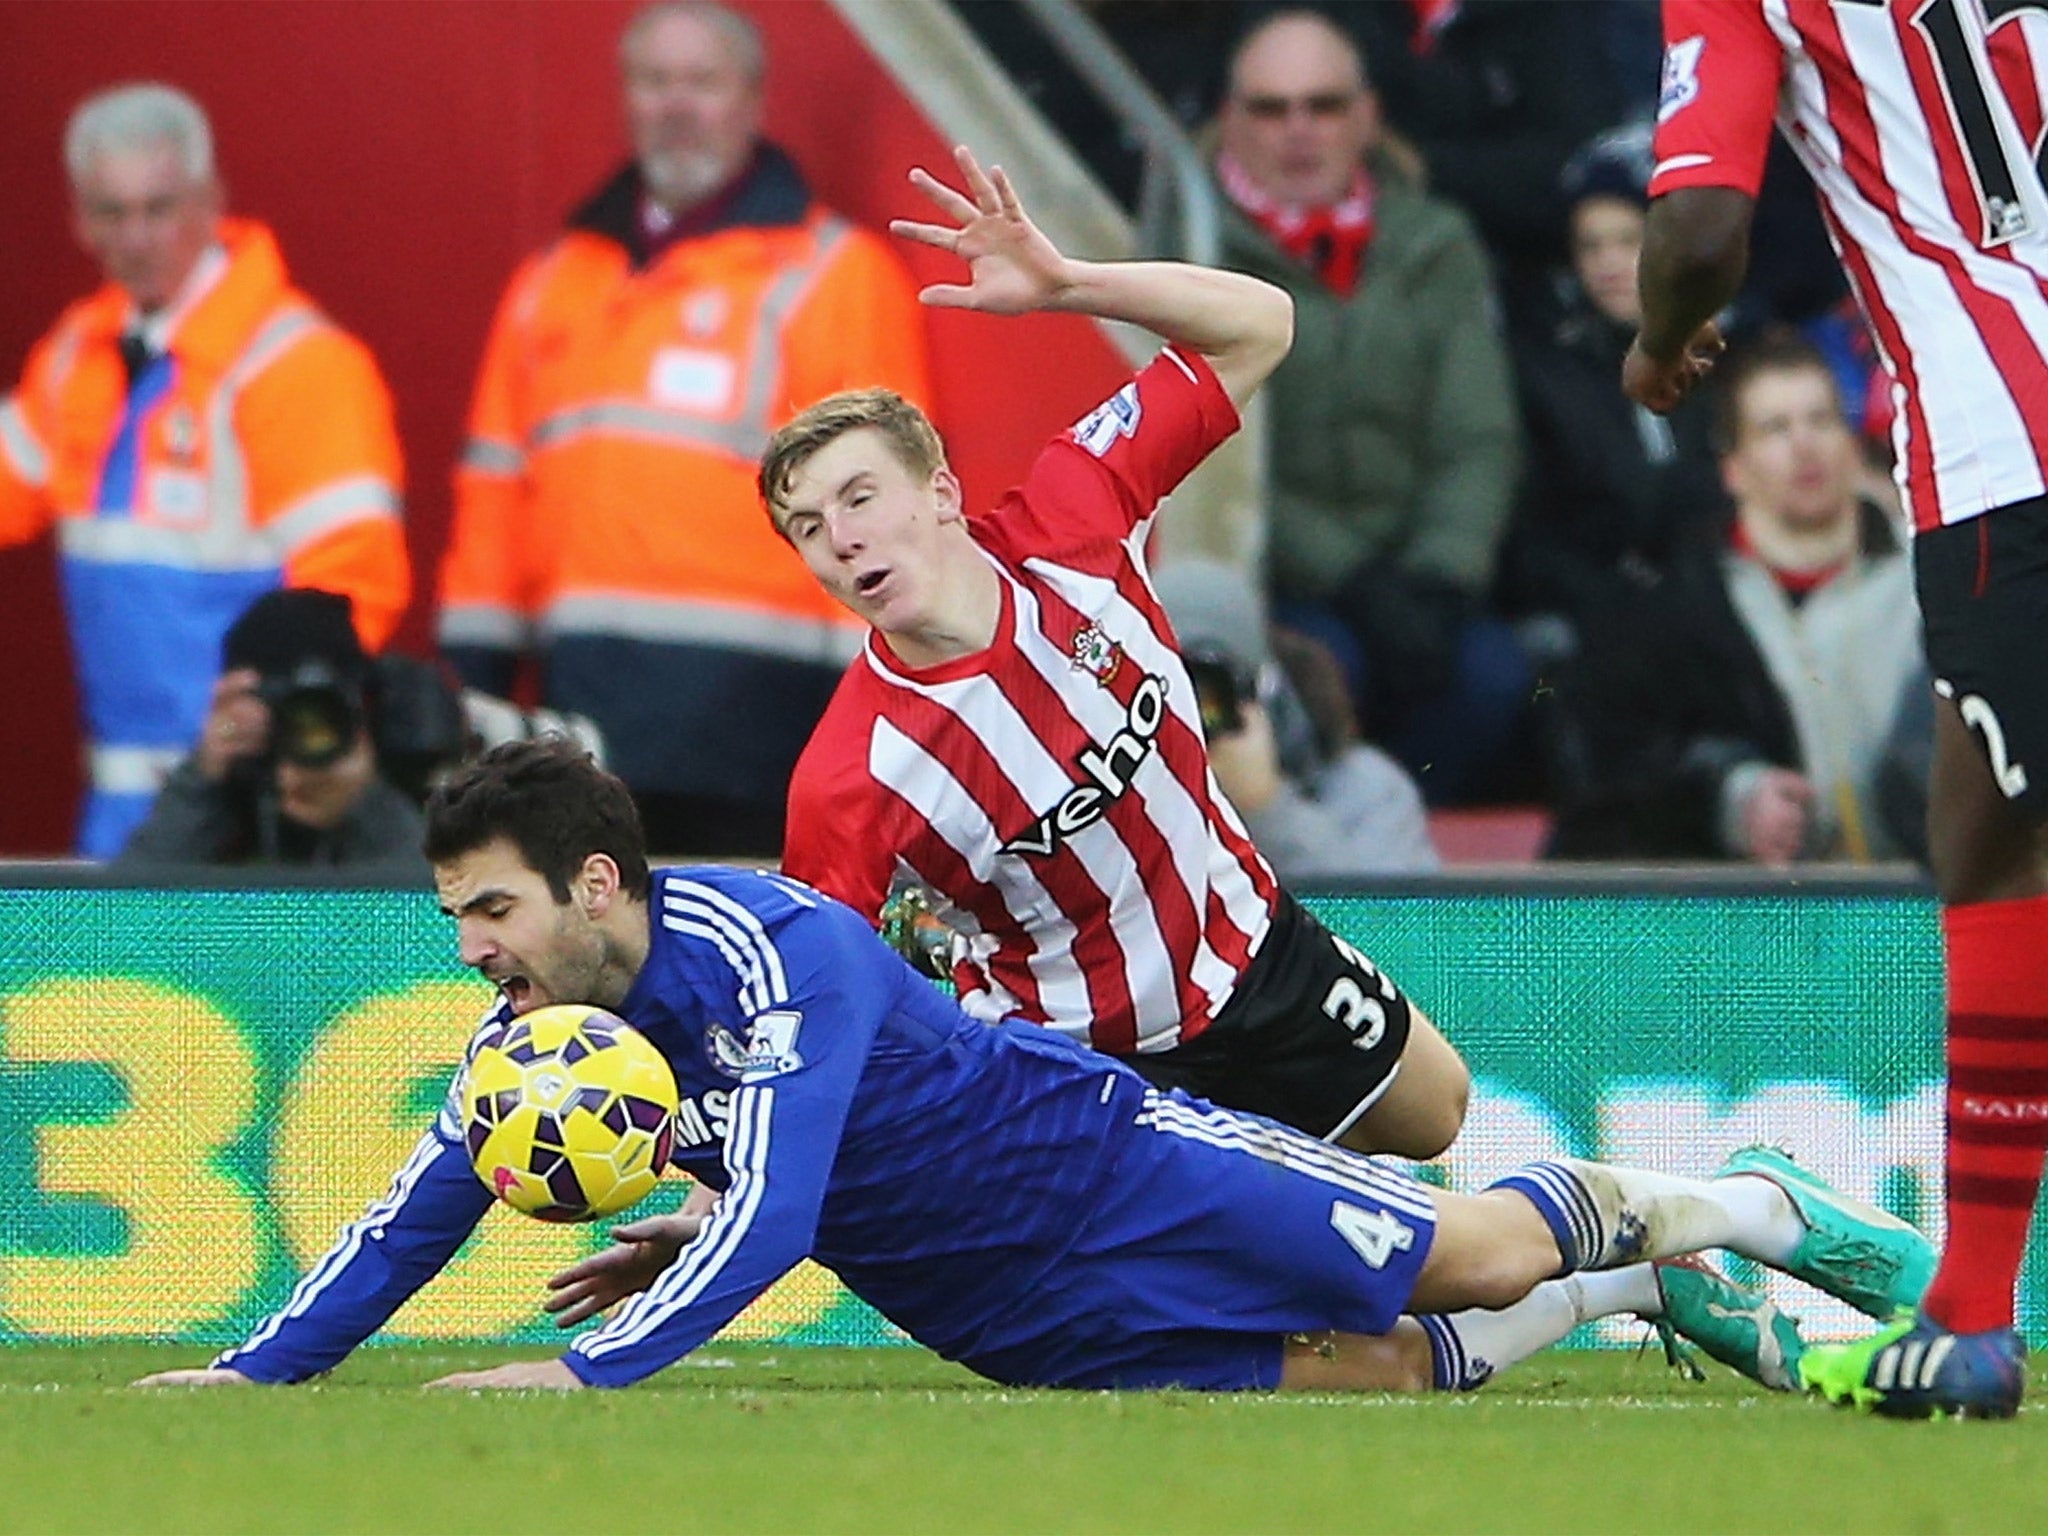 Cesc Fabregas was wrongly booked for diving against Southampton on Sunday